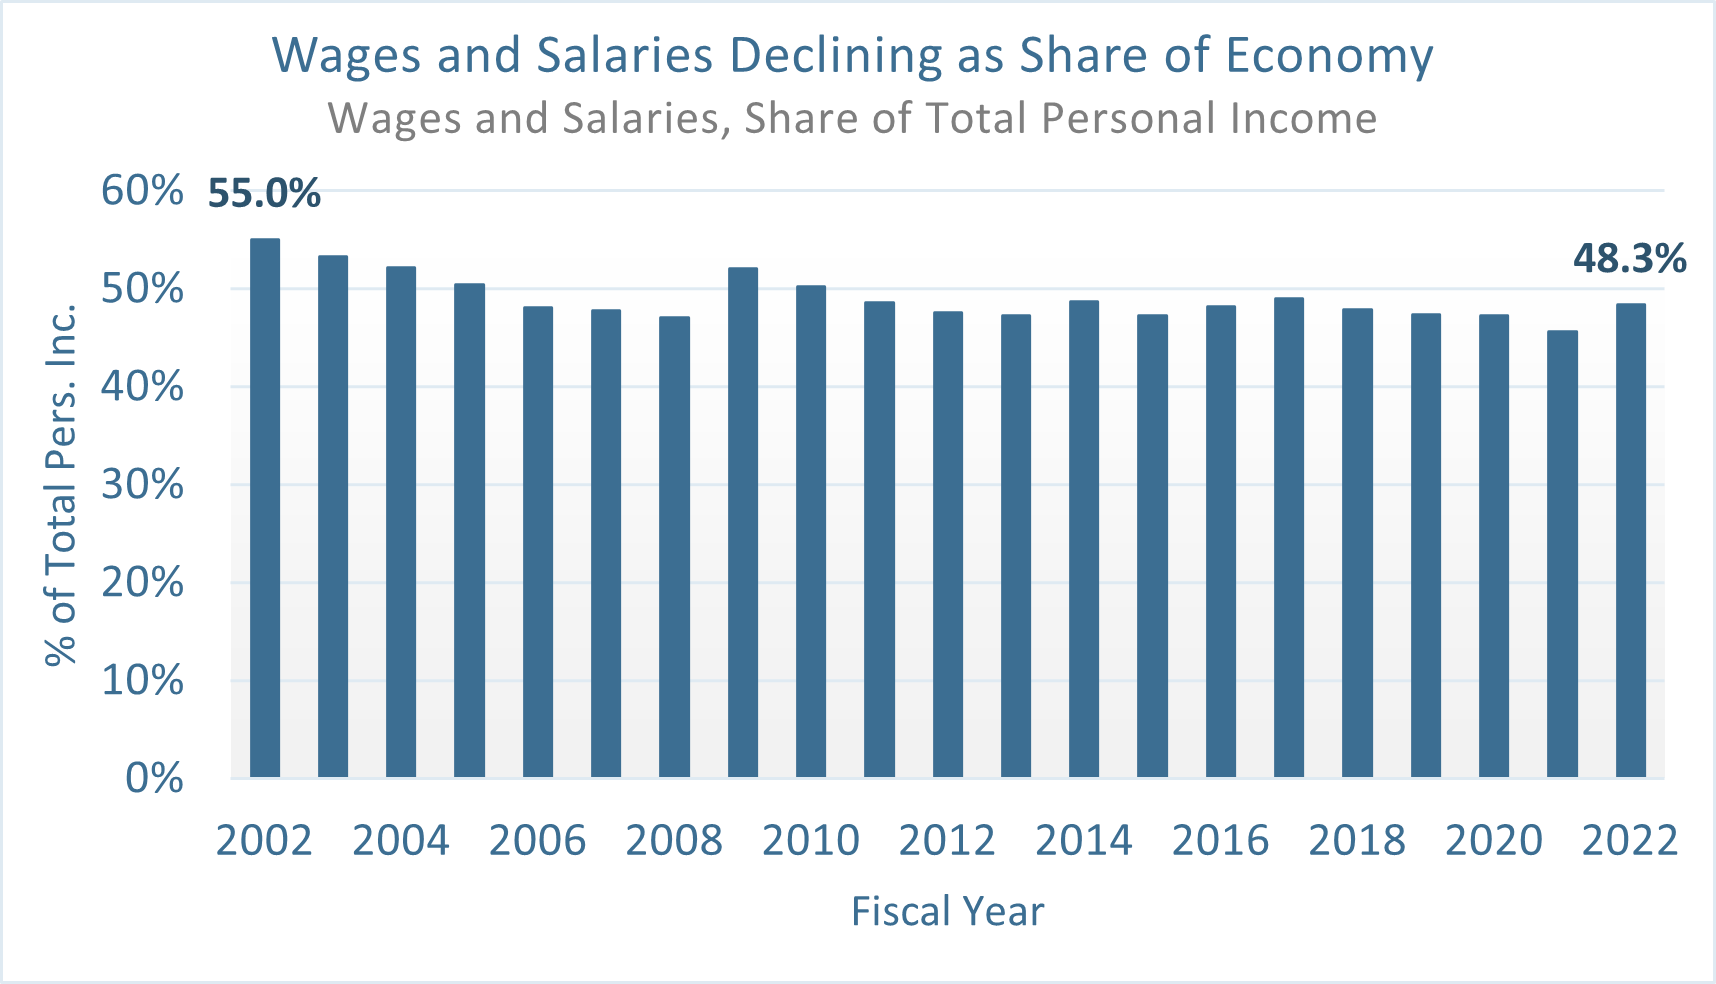 Chart: Wages and Salaries Declining as Share of Economy - Wages and Salaries, Share of Total Personal Income